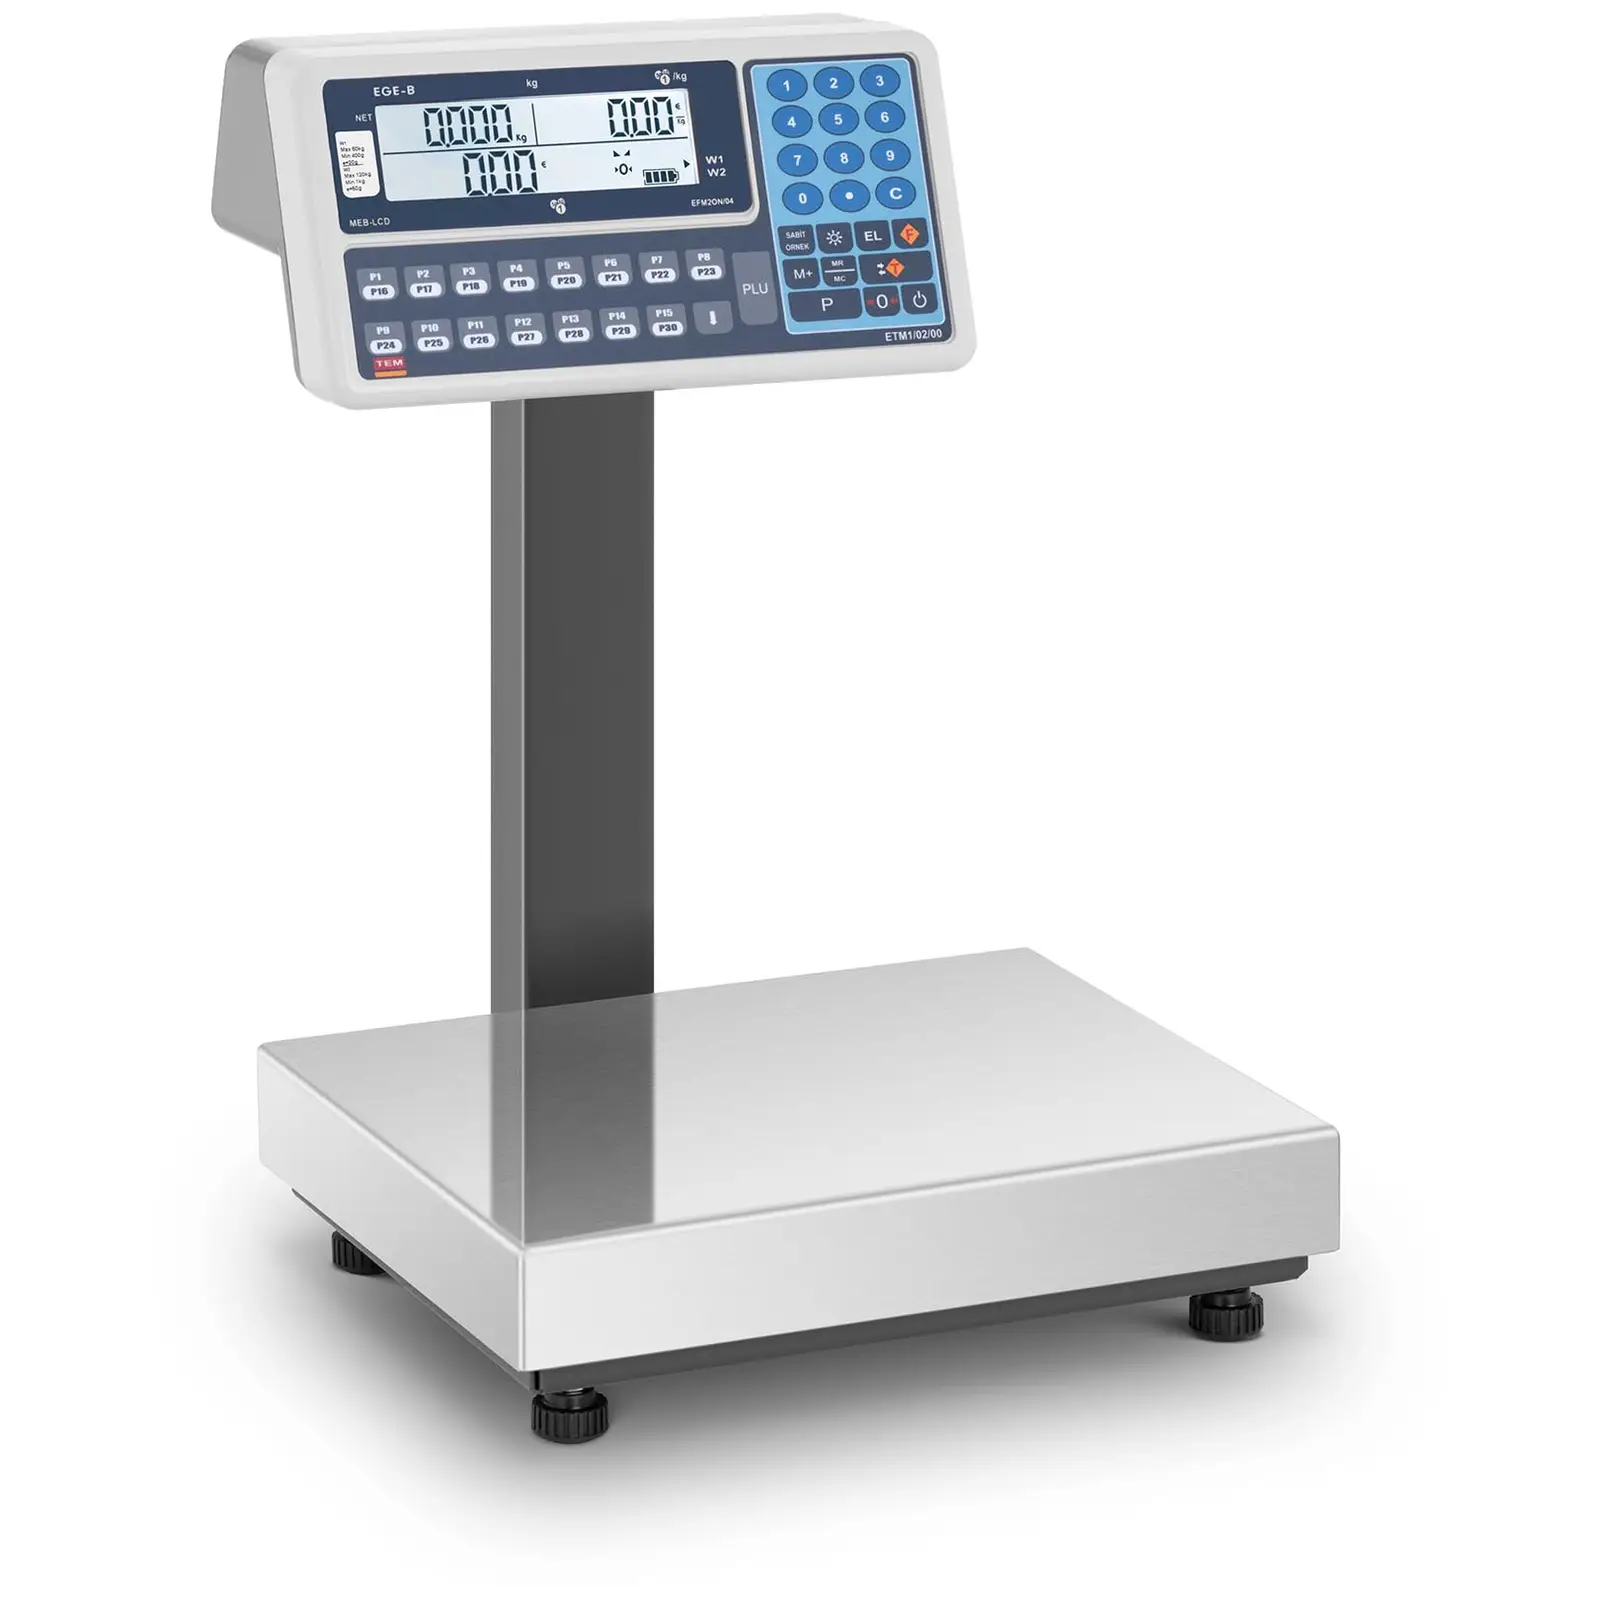 Price Scale - calibrated - 60 kg / 20 g - 120 kg / 50 g - dual LCD